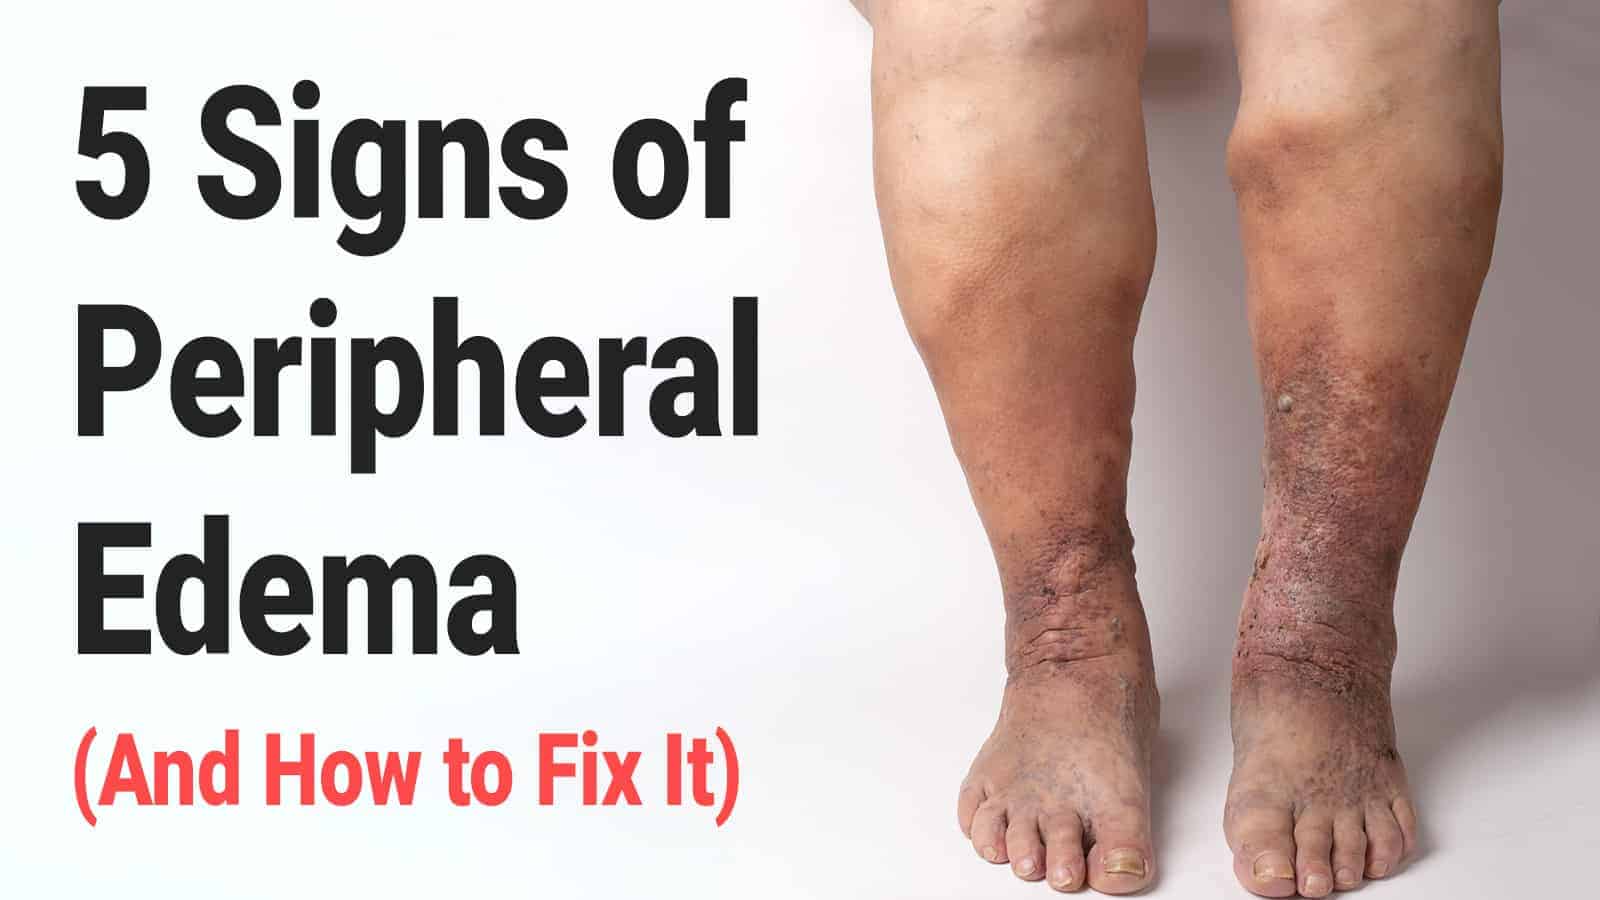 5 Signs of Peripheral Edema (And How to Fix It)